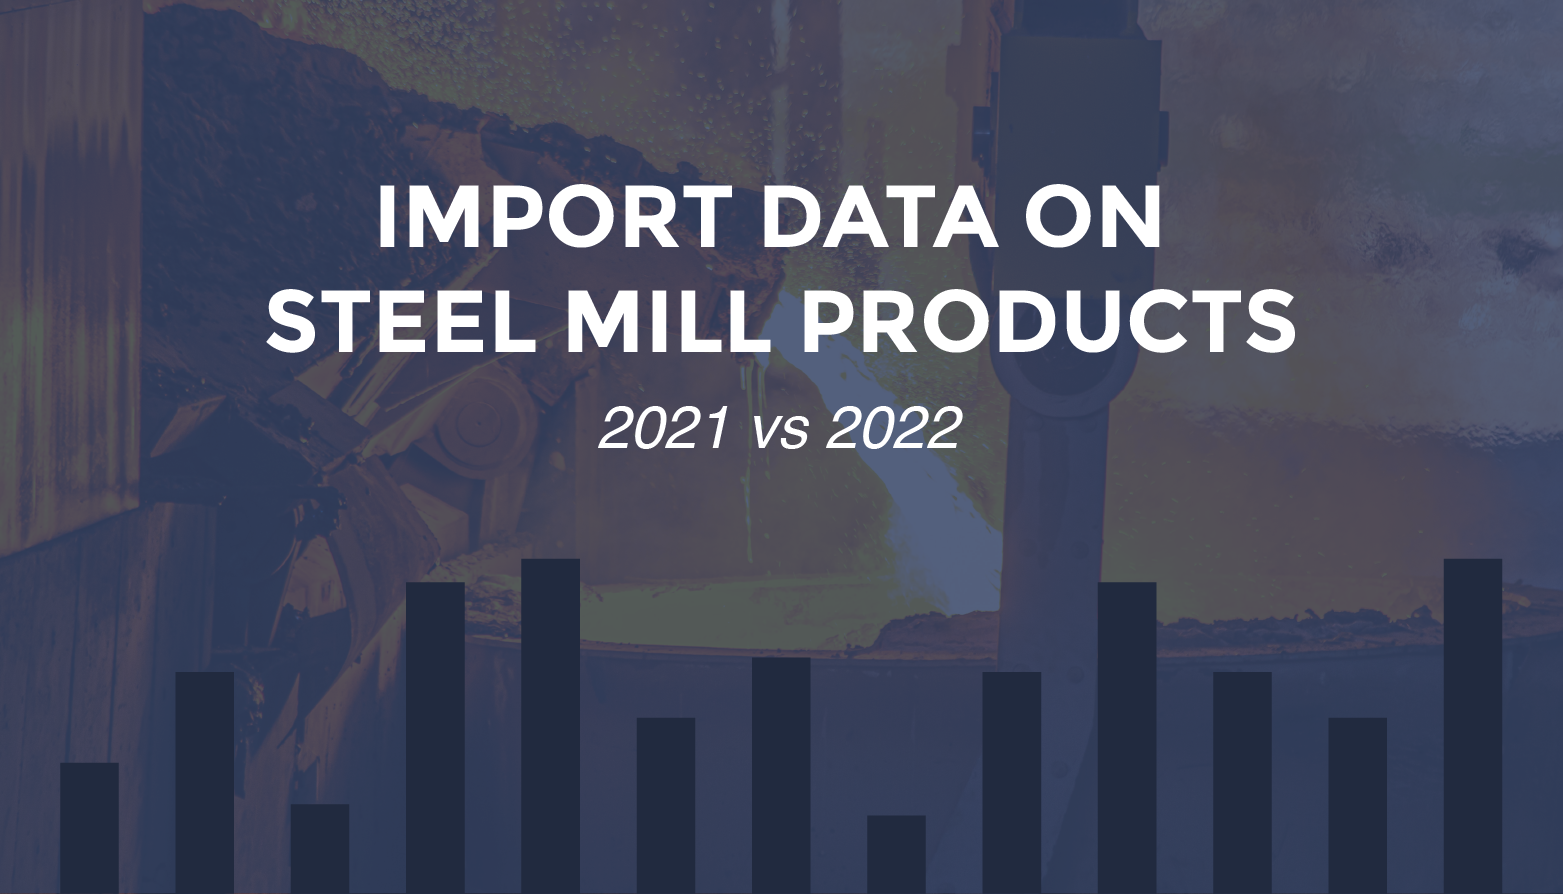 Trade Risk Guaranty looks over the import data on steel between 2021 and 2022.